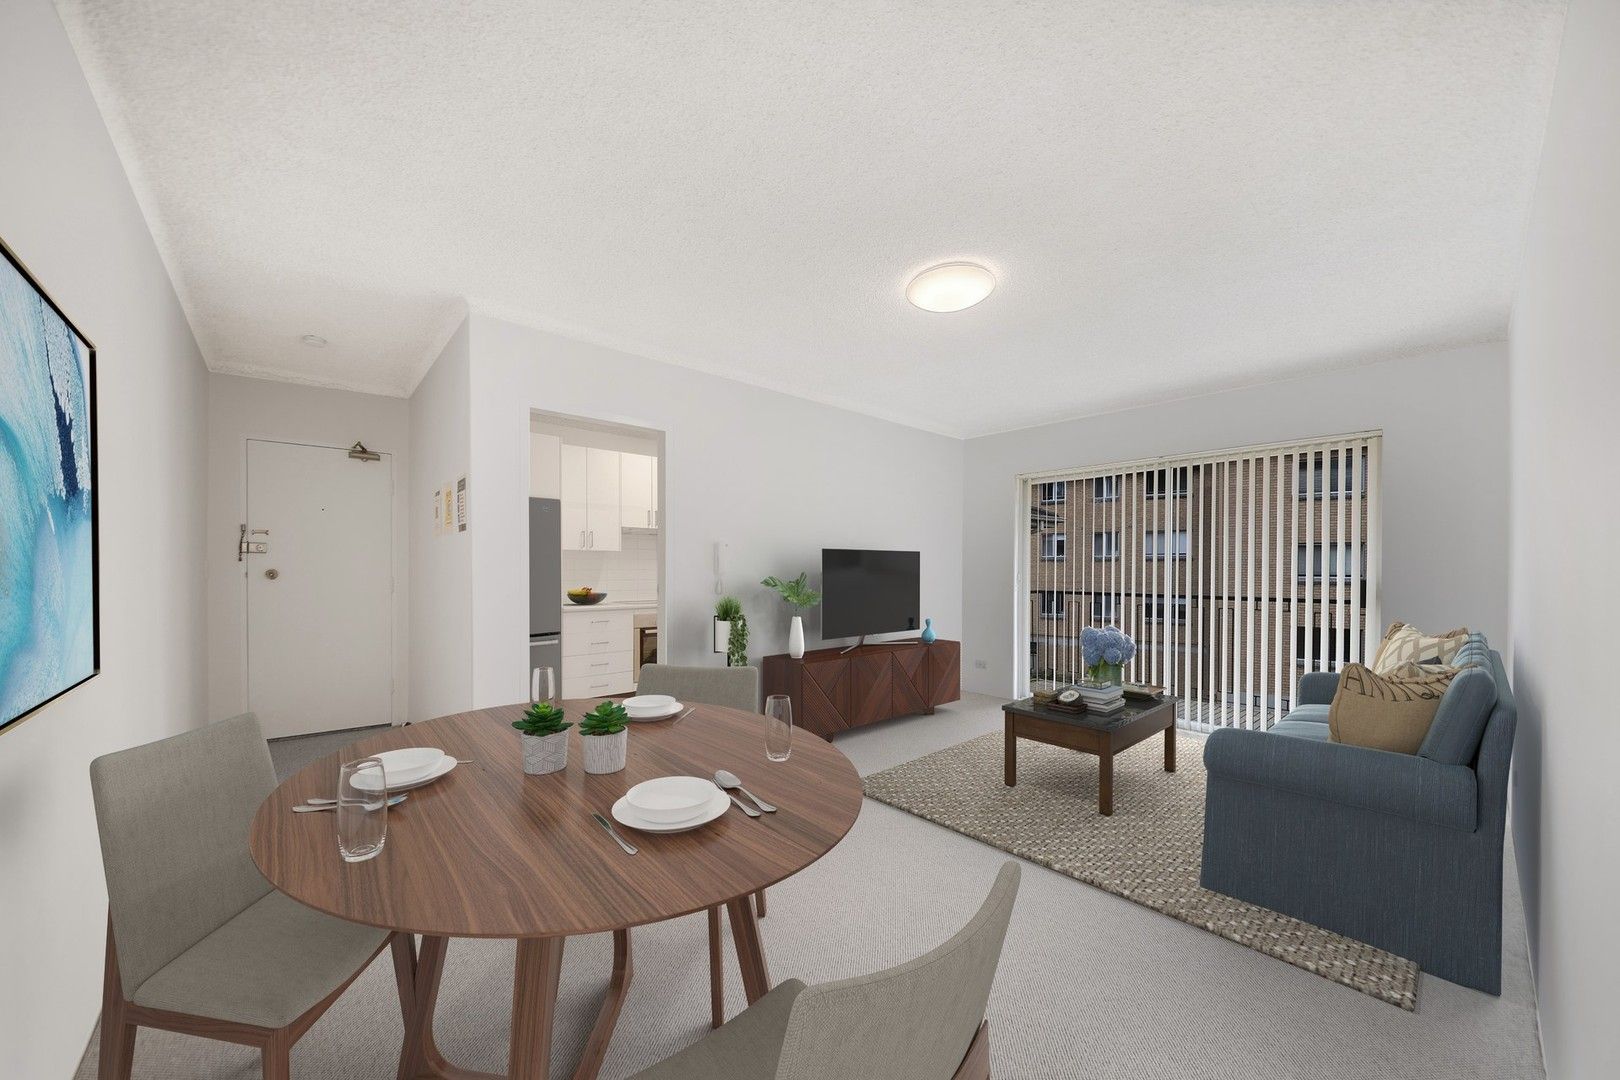 2 bedrooms Apartment / Unit / Flat in 29/7 Ralston Street LANE COVE NSW, 2066